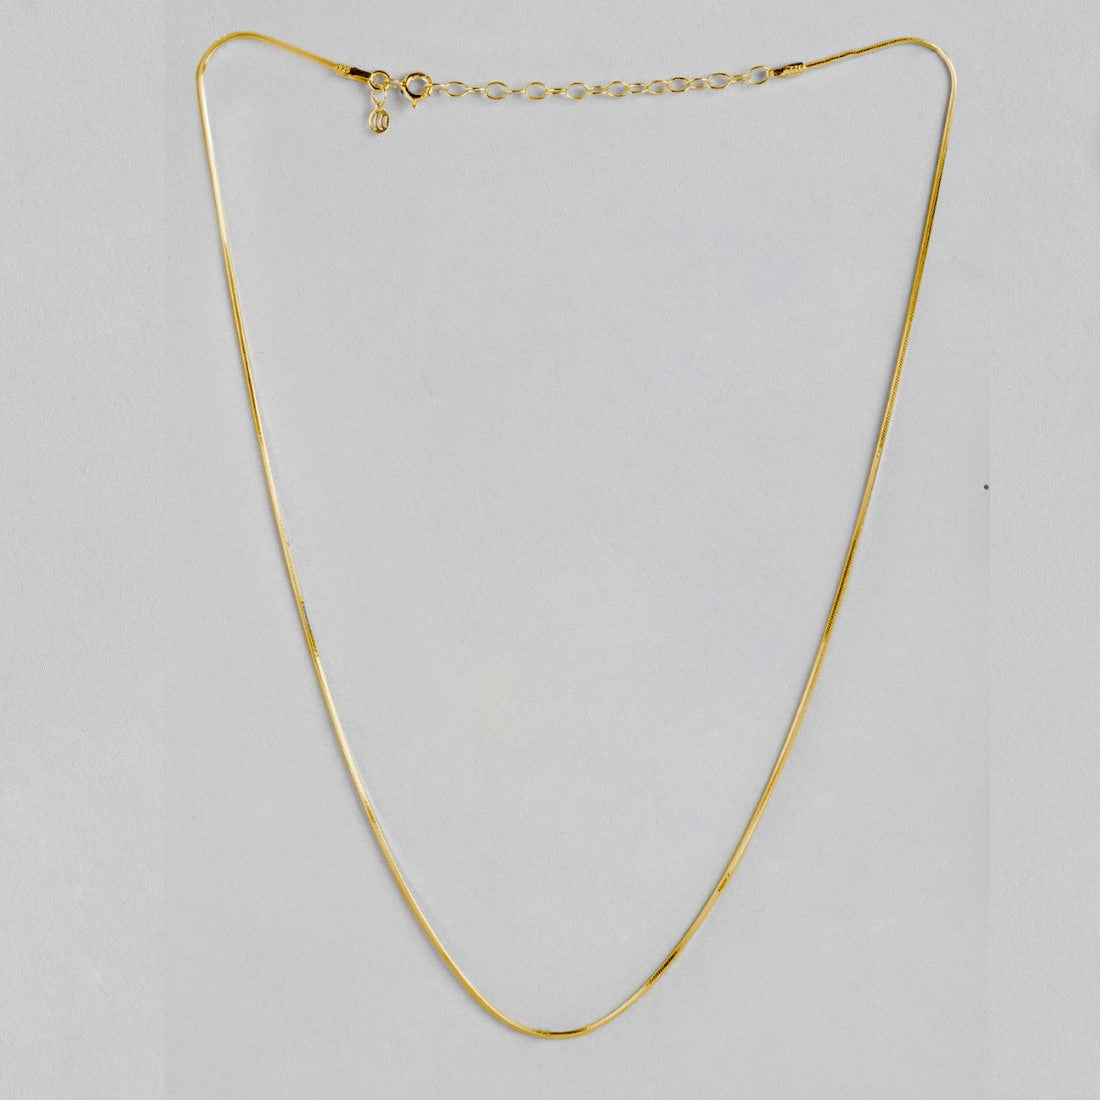 Shimmer and Shine Gold-Plated 925 Sterling Silver Chain